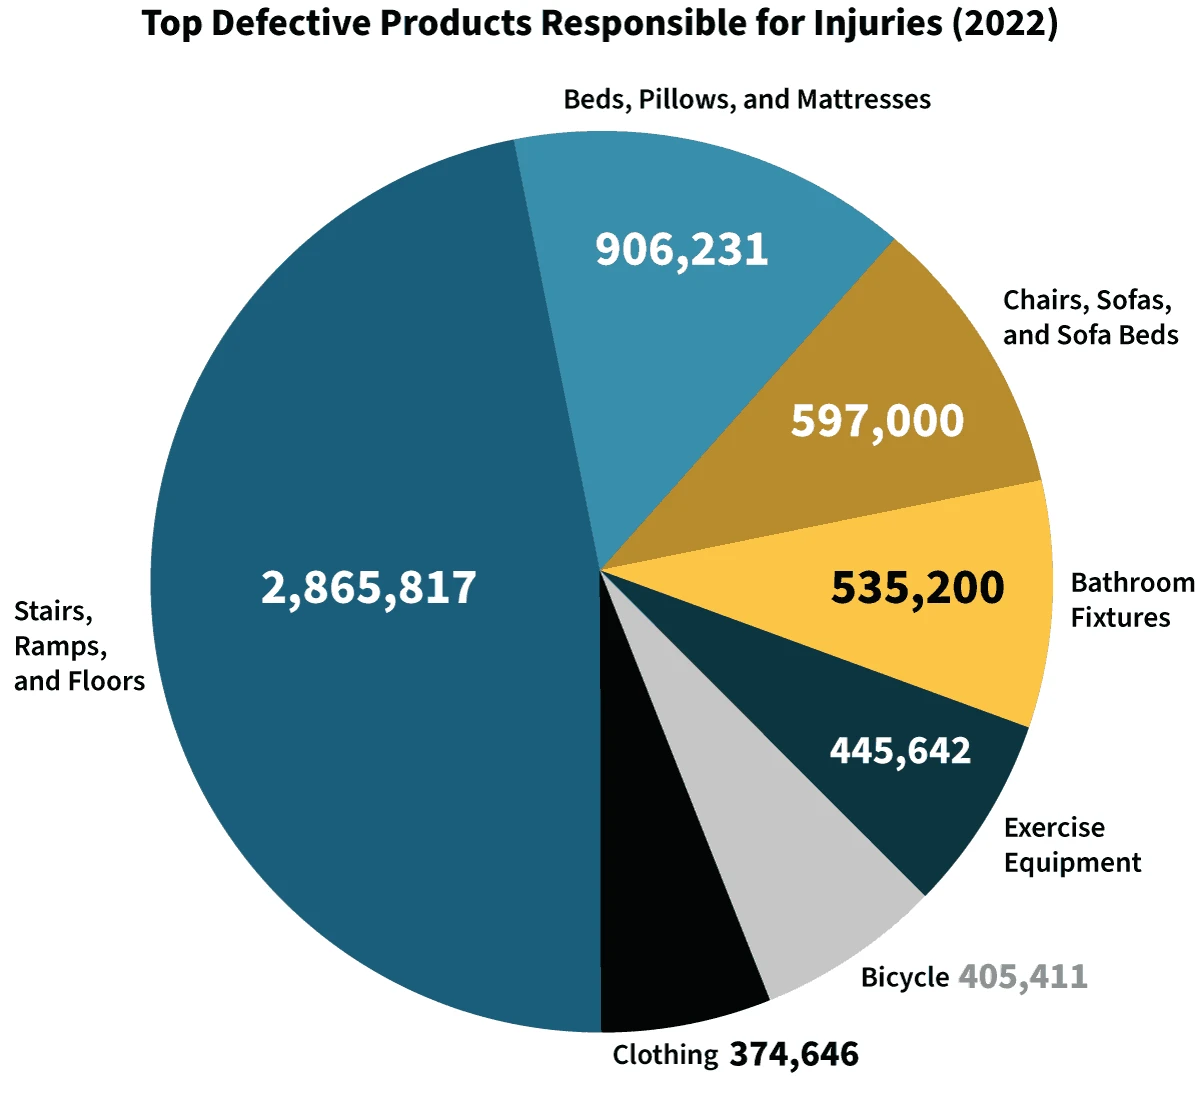 Top defective products responsible for injuries (2022)